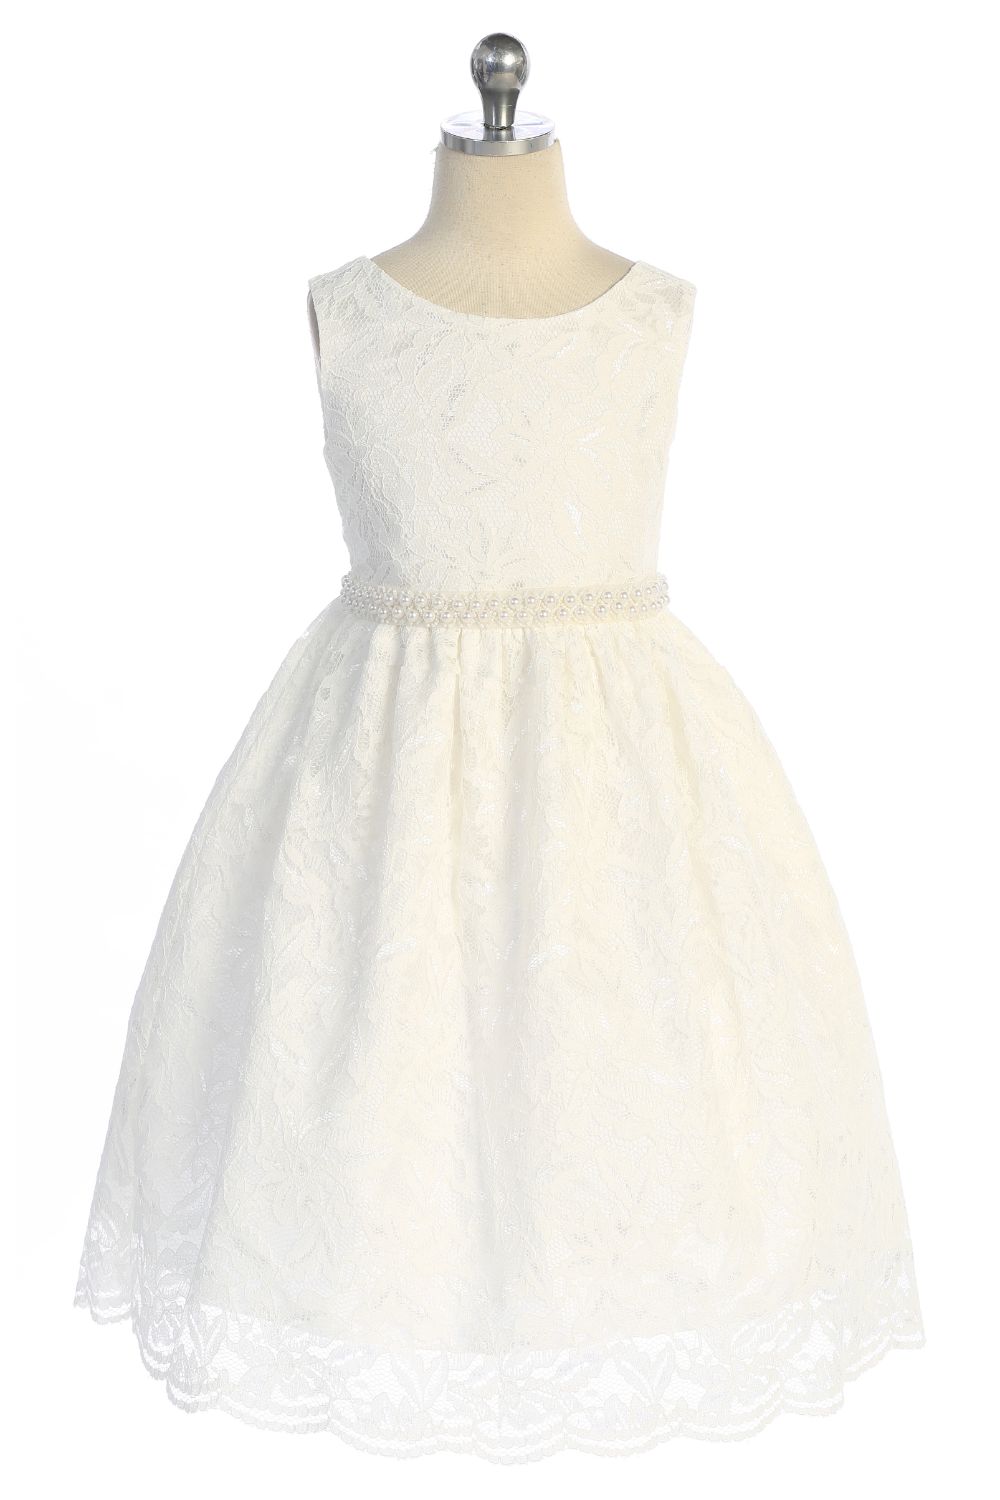 526-C All Lace Girls Dress with V Back & Bow and Thick Pearl Trim and Plus Sizes